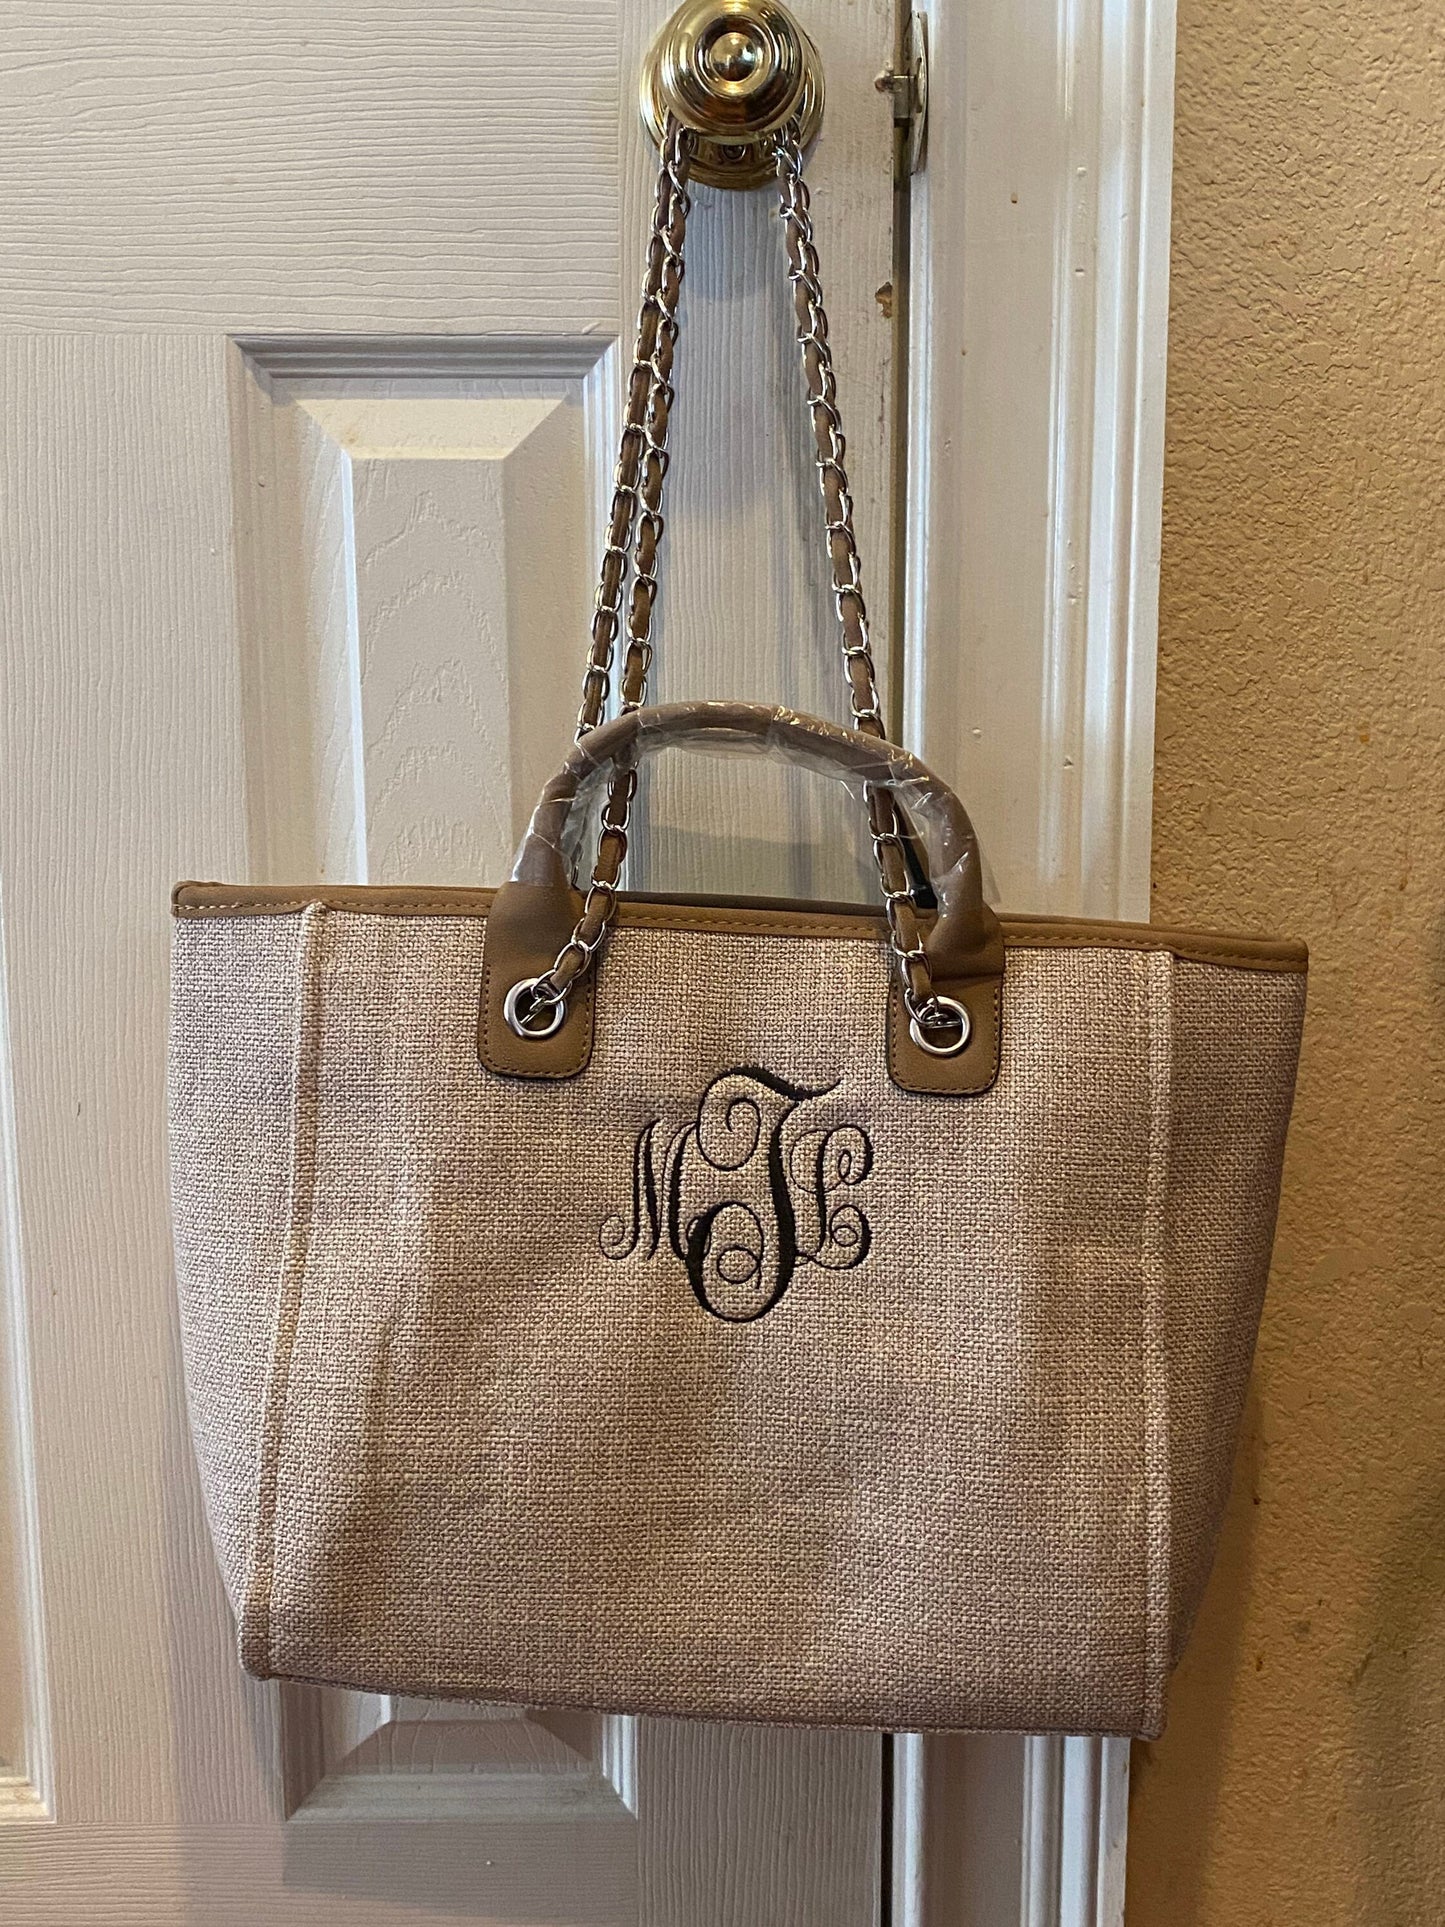 Two-Toned Monogrammed Chain Tote, Tweed Purse, Personalized, Shoulder Bag, Monogrammed, Bag